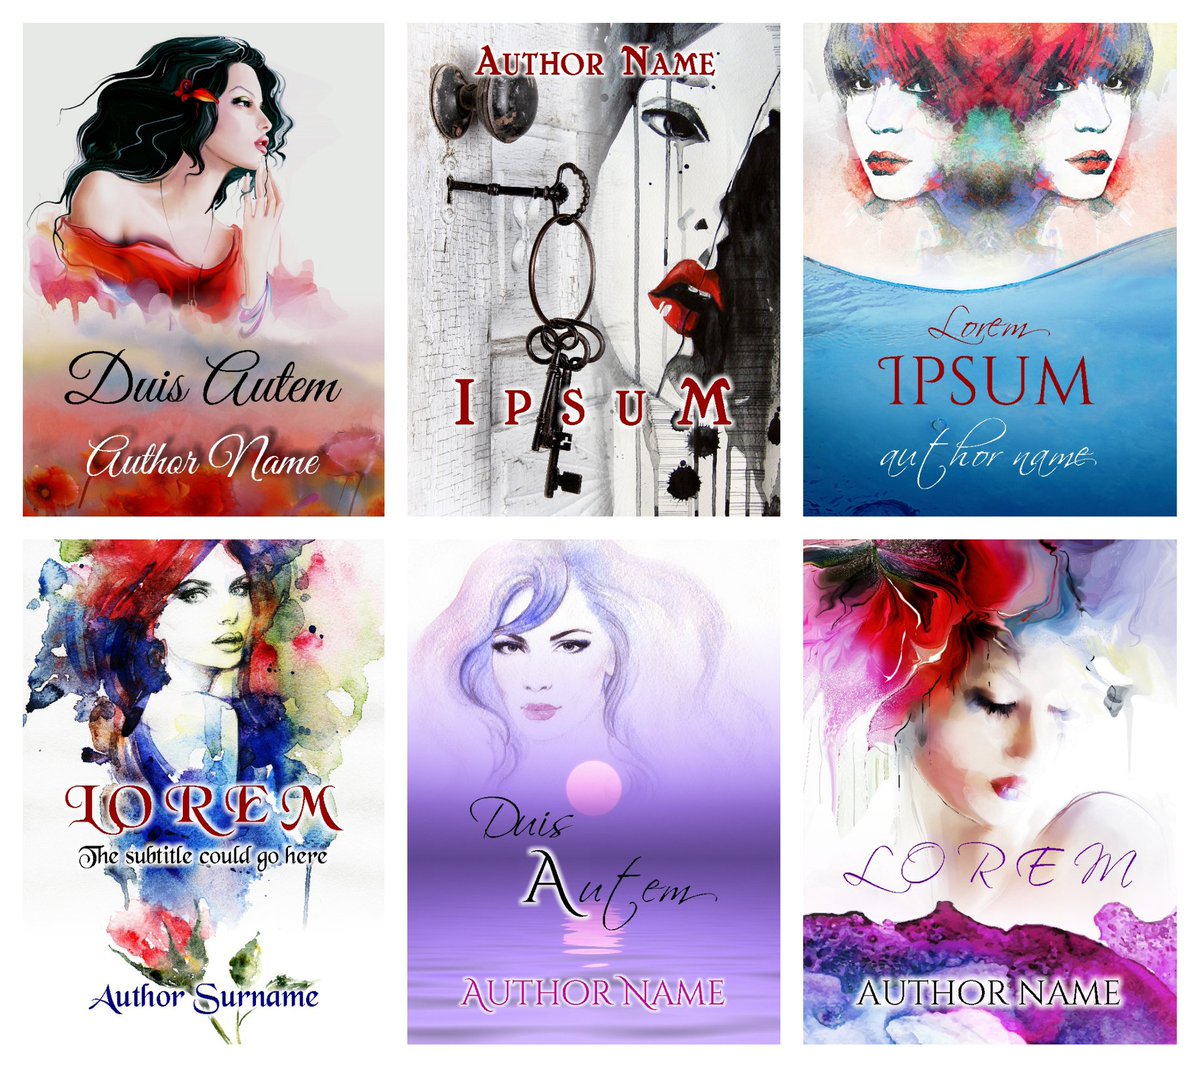 #Authors #Publishers: My Gallery of Art features over 1,650 colorful & unique covers in all genres. SelfPubBookCovers.com/VonnaArt, #WritingCommunity, #writers, #amwriting, #selfpublishing, #bookcovers, #covers, #coverart, #indie, #indieauthors, #bookcoverdesign, @SelfPubBkCovers